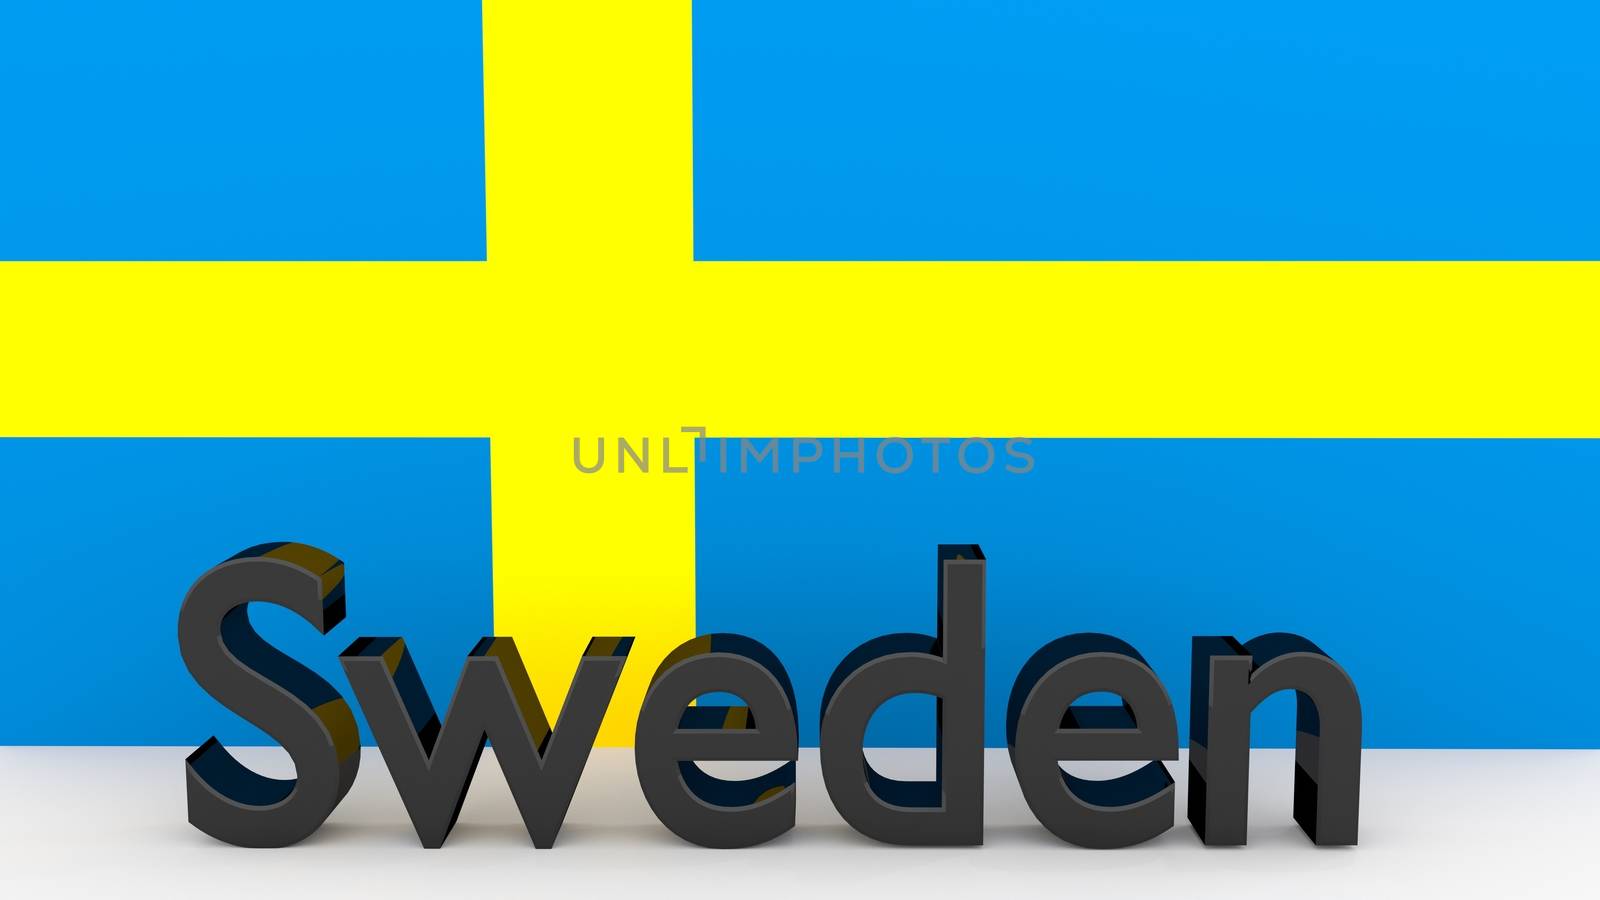 Writing Sweden made of dark metal  in front of a swedish flag